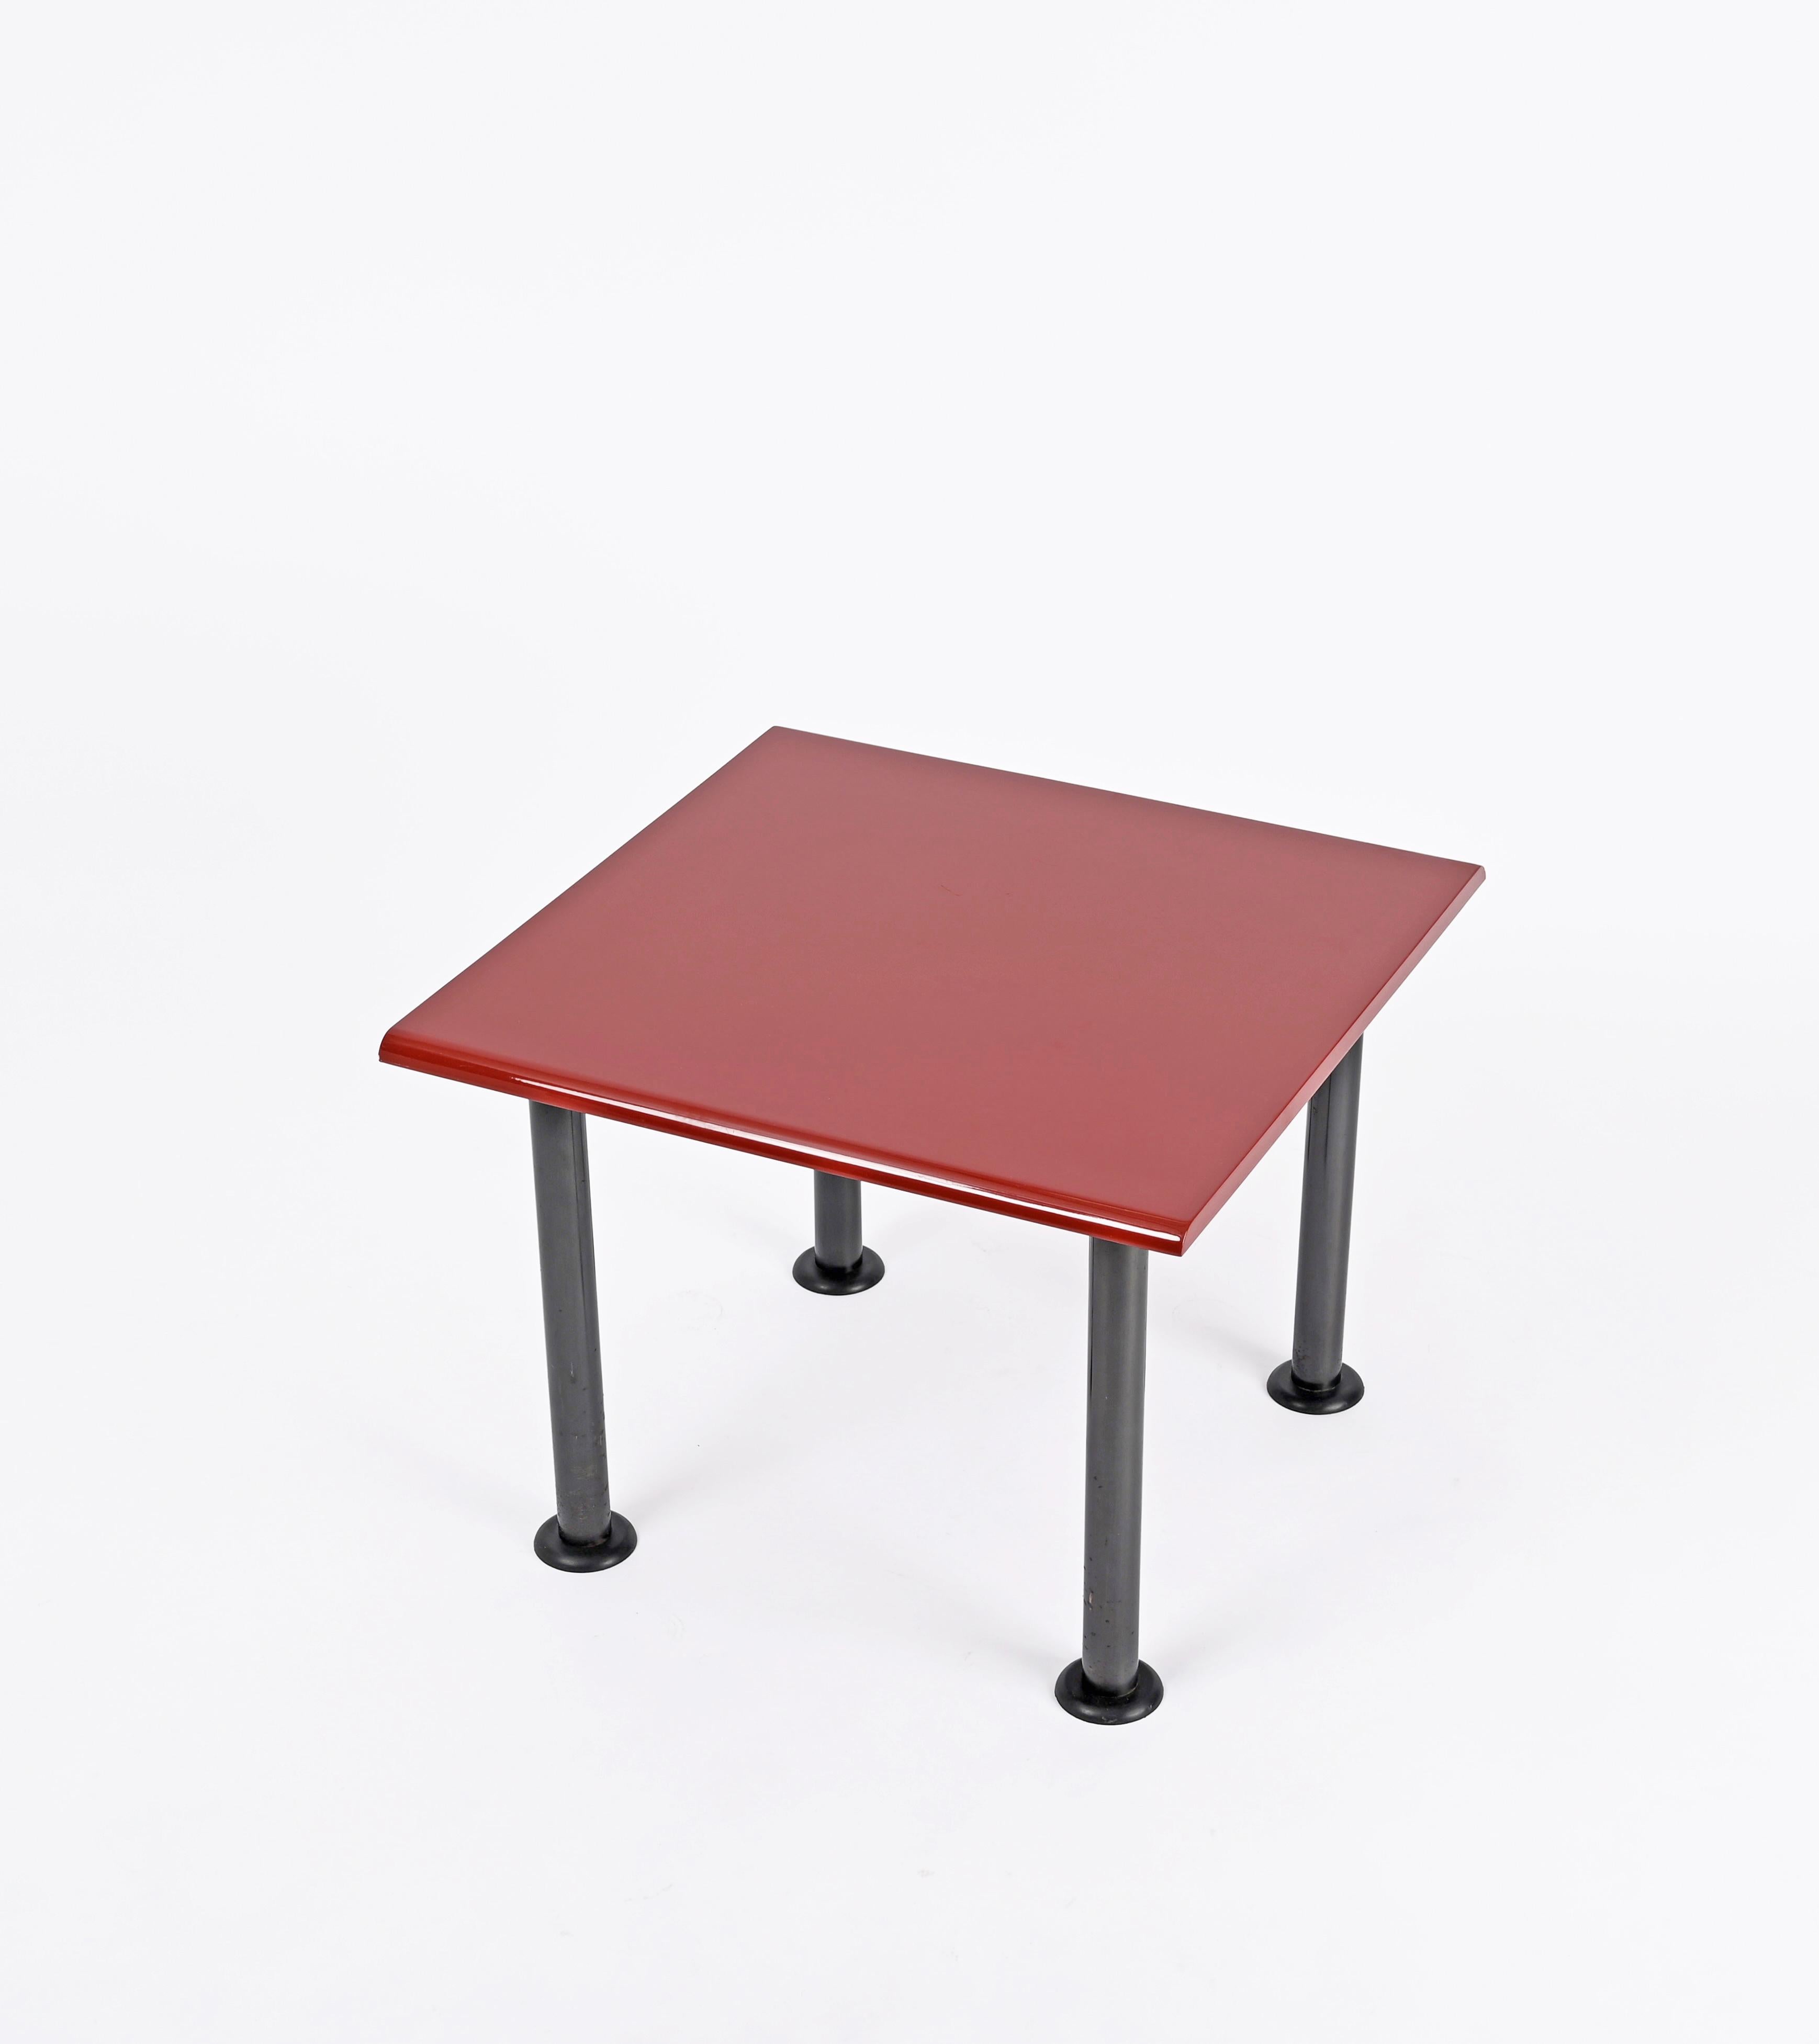 Midcentury Memphis Style Square Coffee Table with Cardinal Red Top, Italy 1980s For Sale 2